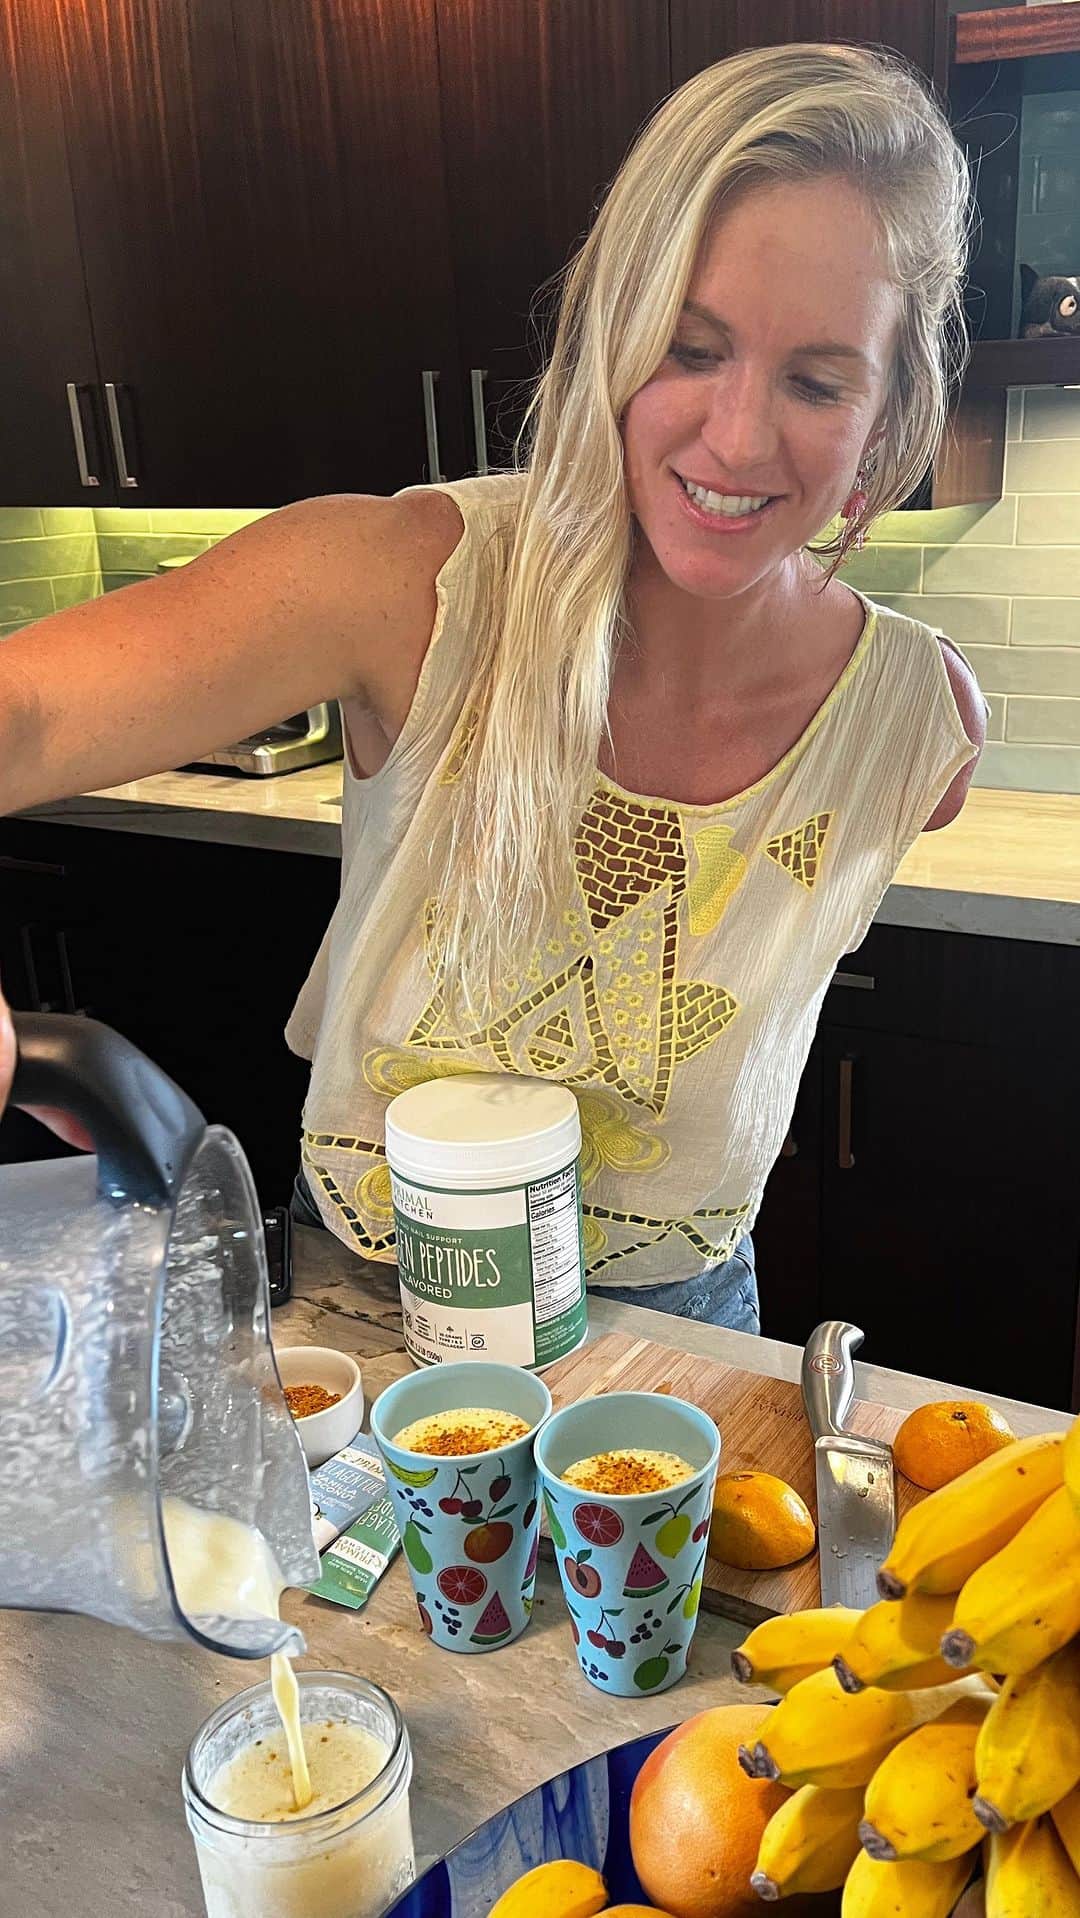 Bethany Hamiltonのインスタグラム：「One staple food creation in our house is smoothies! Adam and I got in the kitchen and made a yummy mango banana smoothie with collagen peptides and topped it with bee pollen 🥥🍌🥭🍊😋  -1 to 2 cups coconut water -2 cups milk -2 small bananas or 1 regular banana -2 cups frozen mango -fresh juice from 1 small orange -1 scoop of collagen peptides (I like @primalkitchenfoods!) -handful of ice -bee pollen  You can always adjust to what you like or what you have on hand! #bethanystylehealth  #primalkitchen #sponsored #biggerbite」